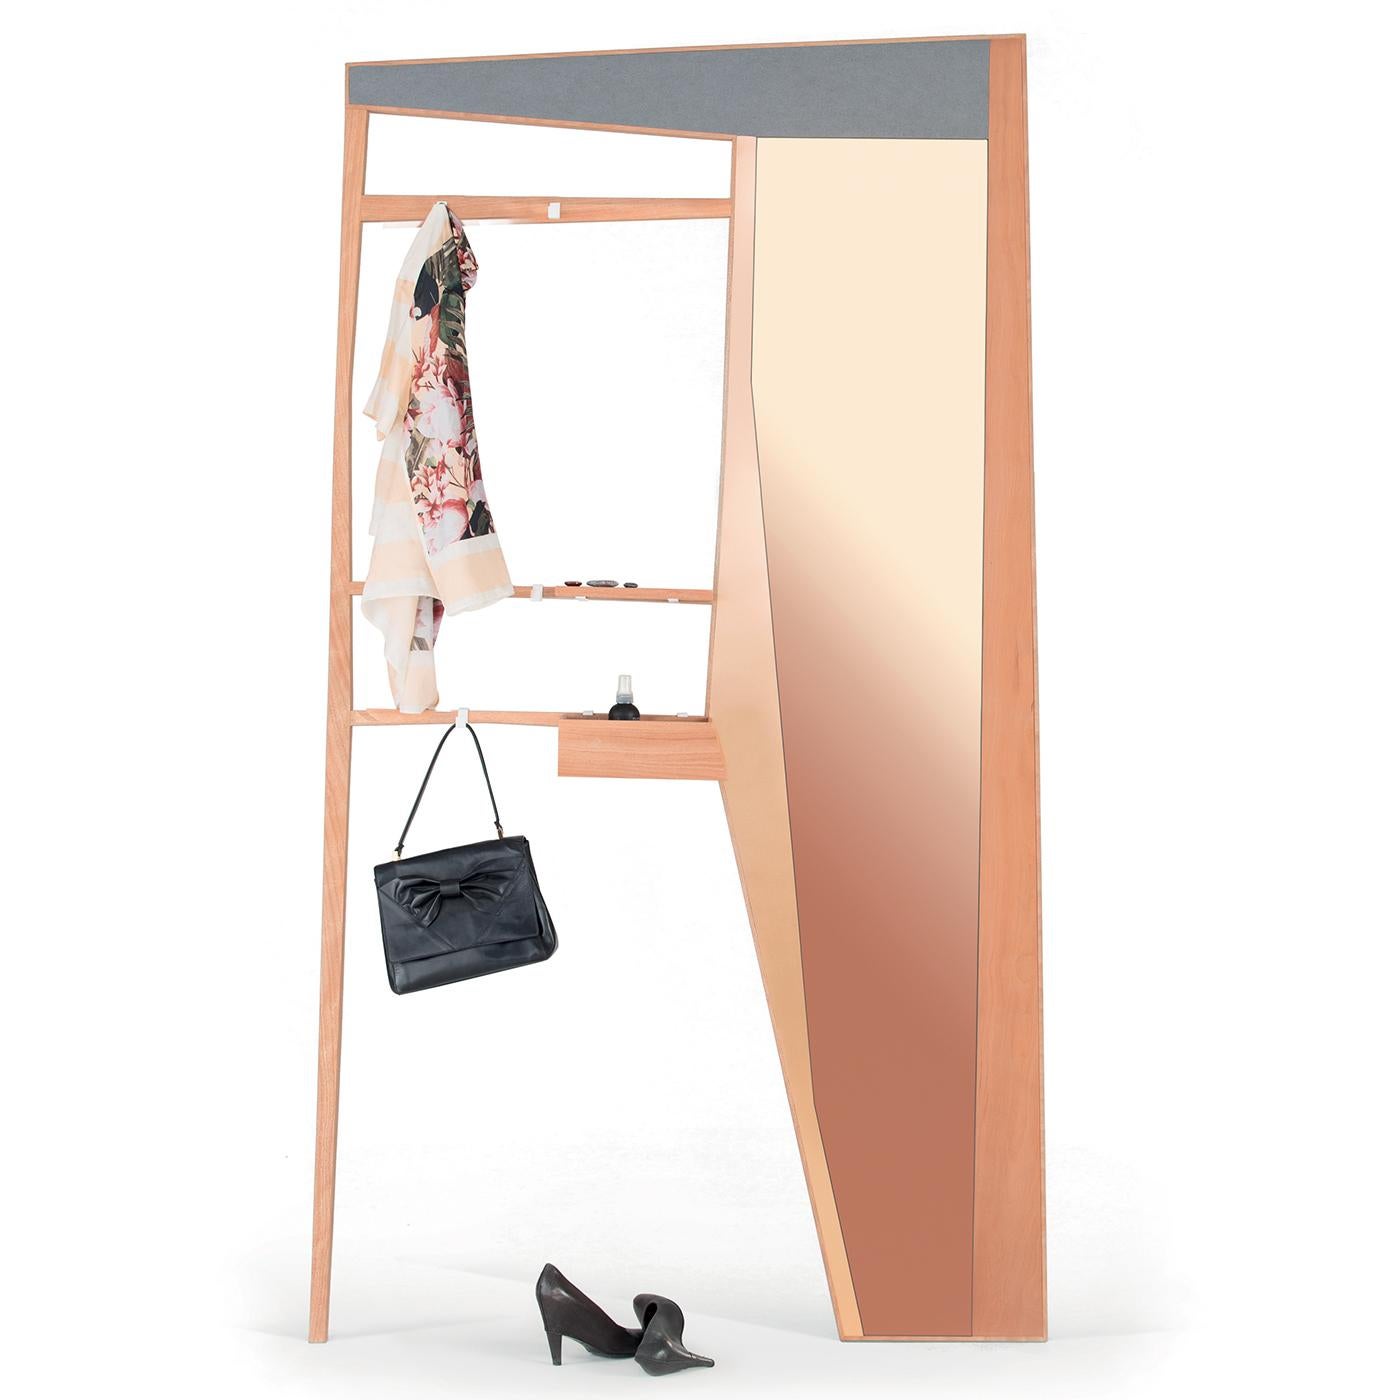 Sophisticated and modern, this multifunctional piece comprises a rectangular frame in dark grey and pear wood that encloses two distinctive elements: an entryway wardrobe with two hooks as coat hangers and three shelves as vide-poche, and an